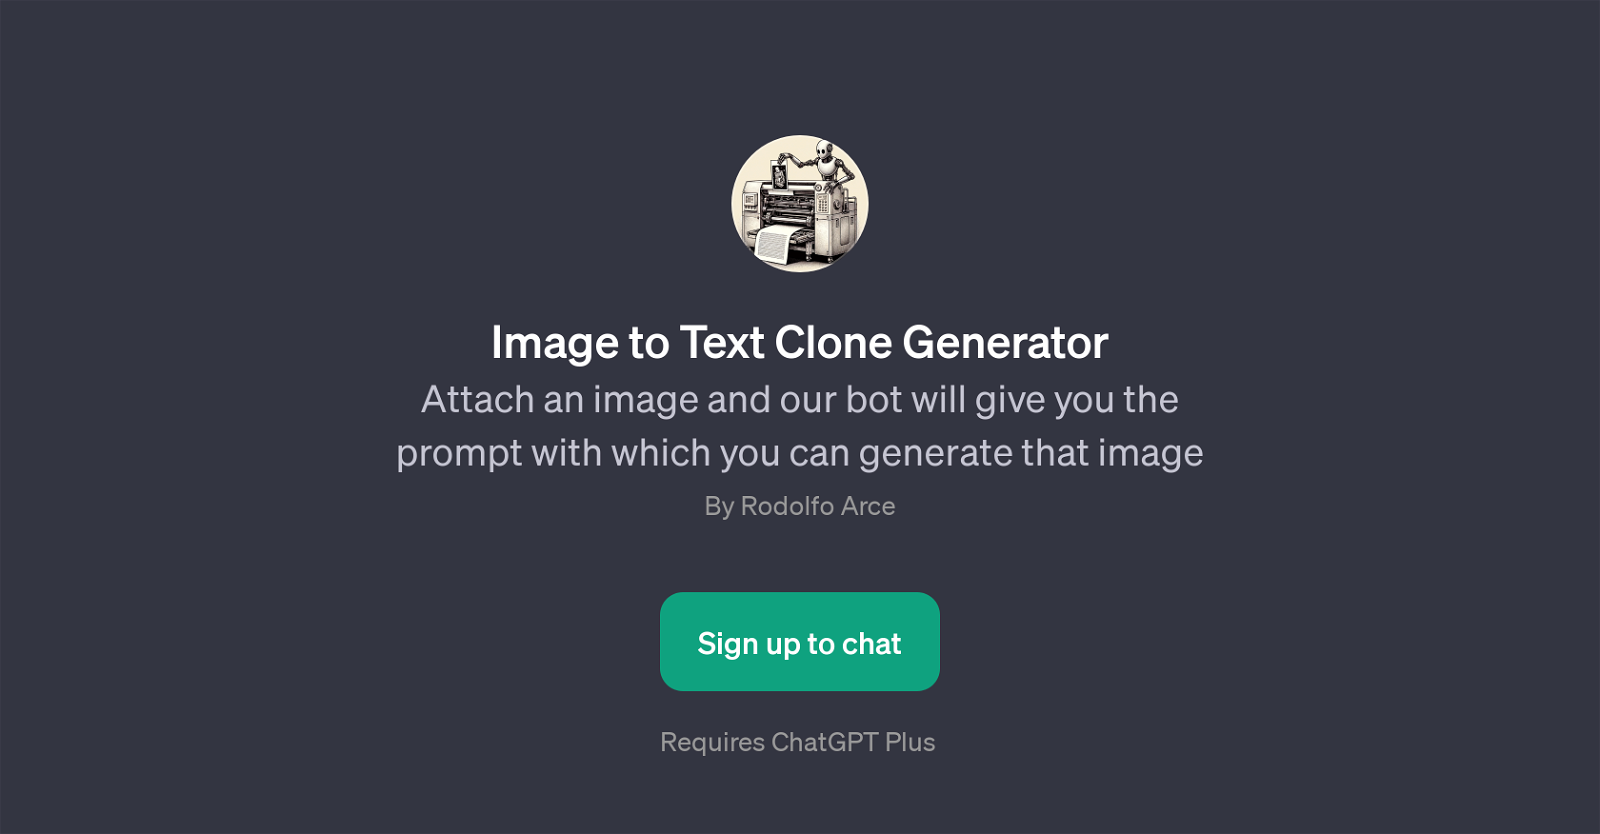 Image to Text Clone Generator website